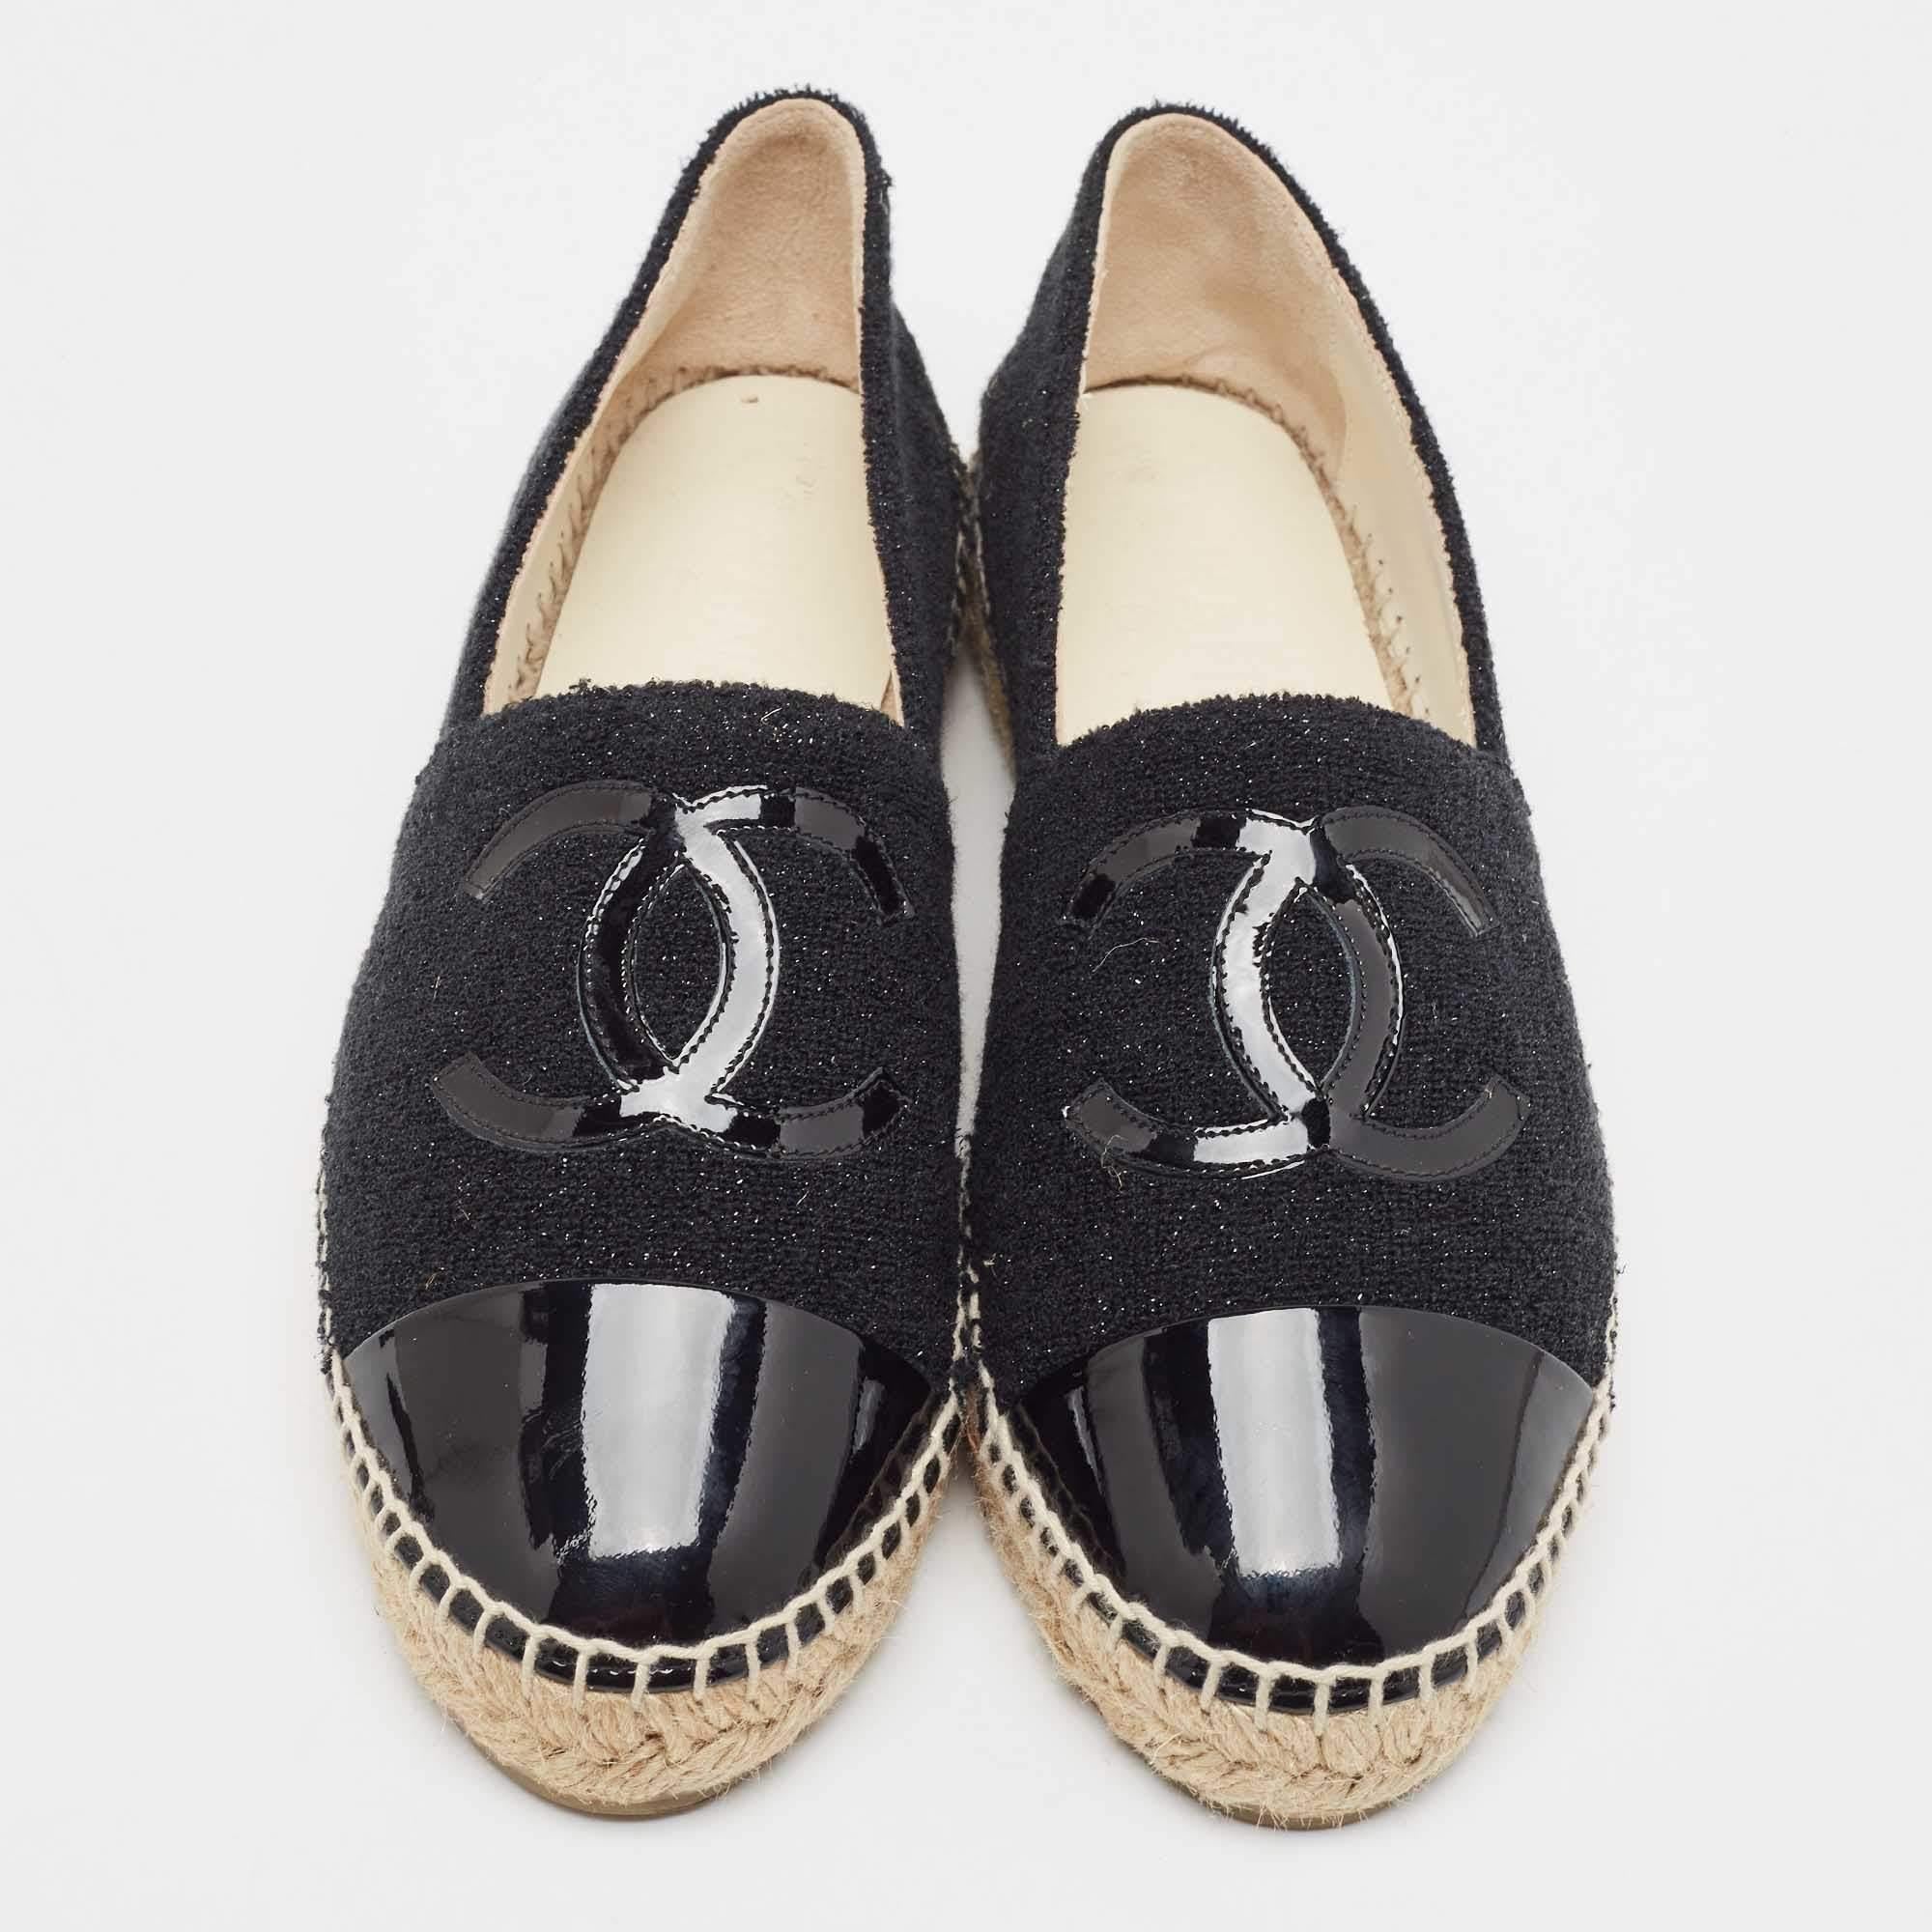 Women's Chanel Black Tweed and Patent CC Espadrille Flats Size 39